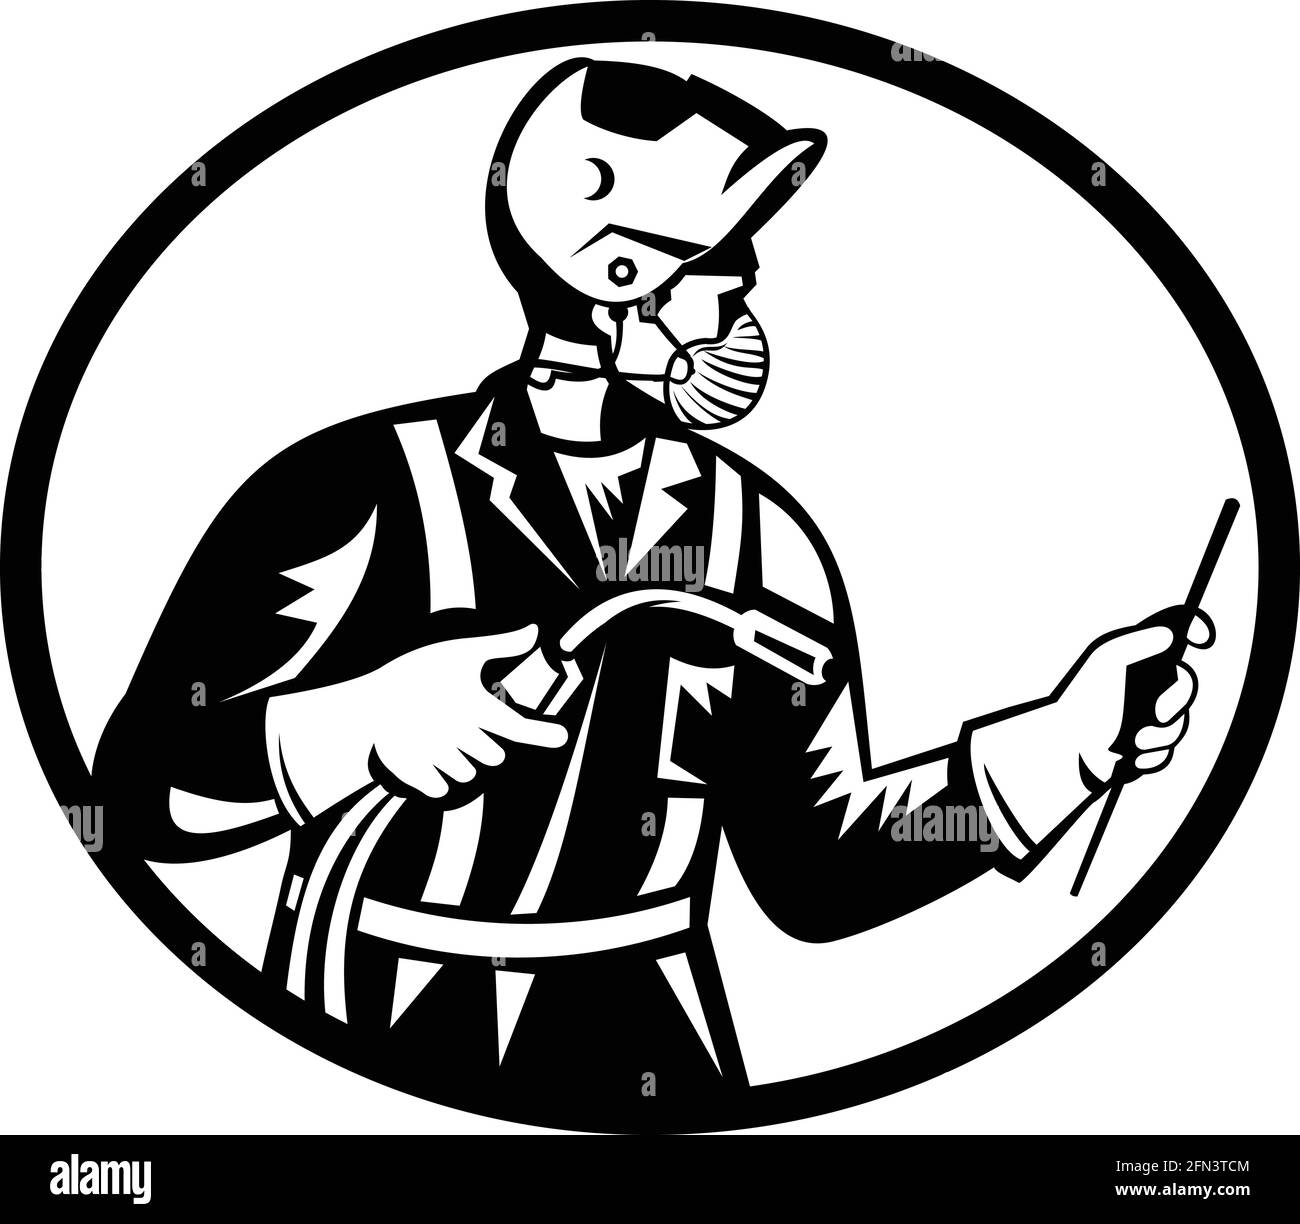 Illustration of welder worker wearing a face mask and holding welding torch viewed from side inside oval done in retro woodcut style. Stock Vector